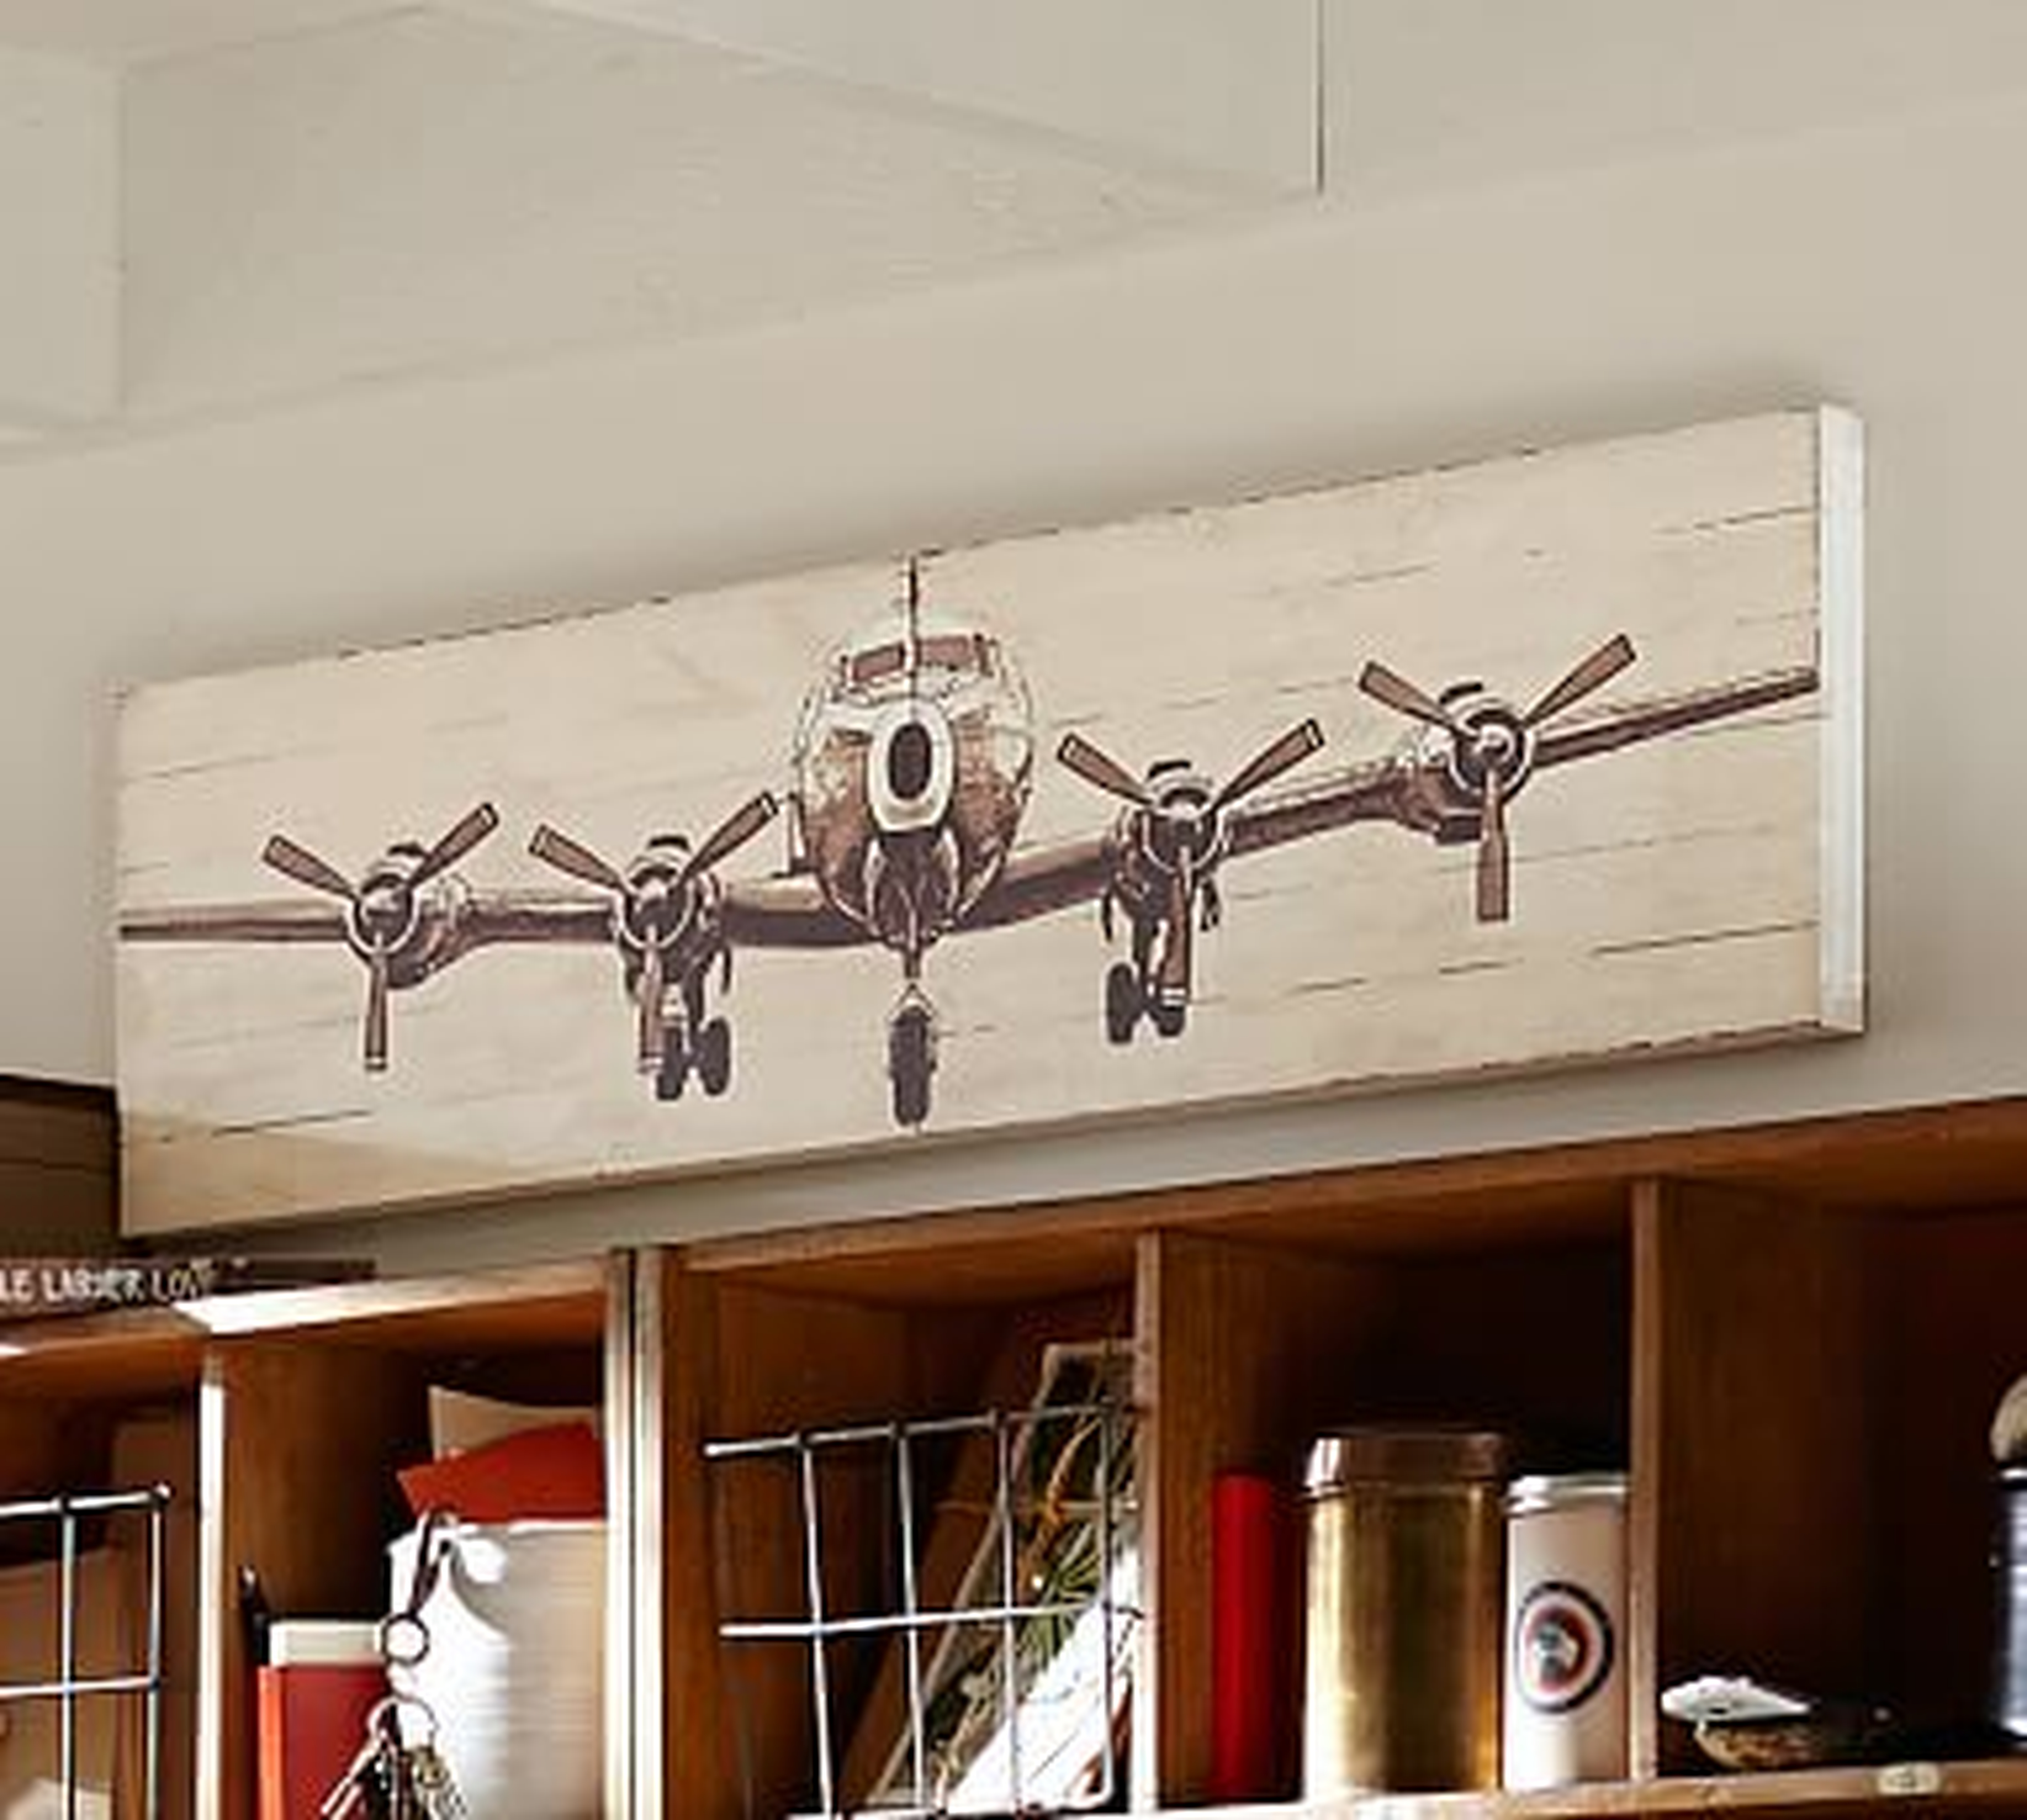 Small Planked Airplane Panels, 12 x 50" - Pottery Barn